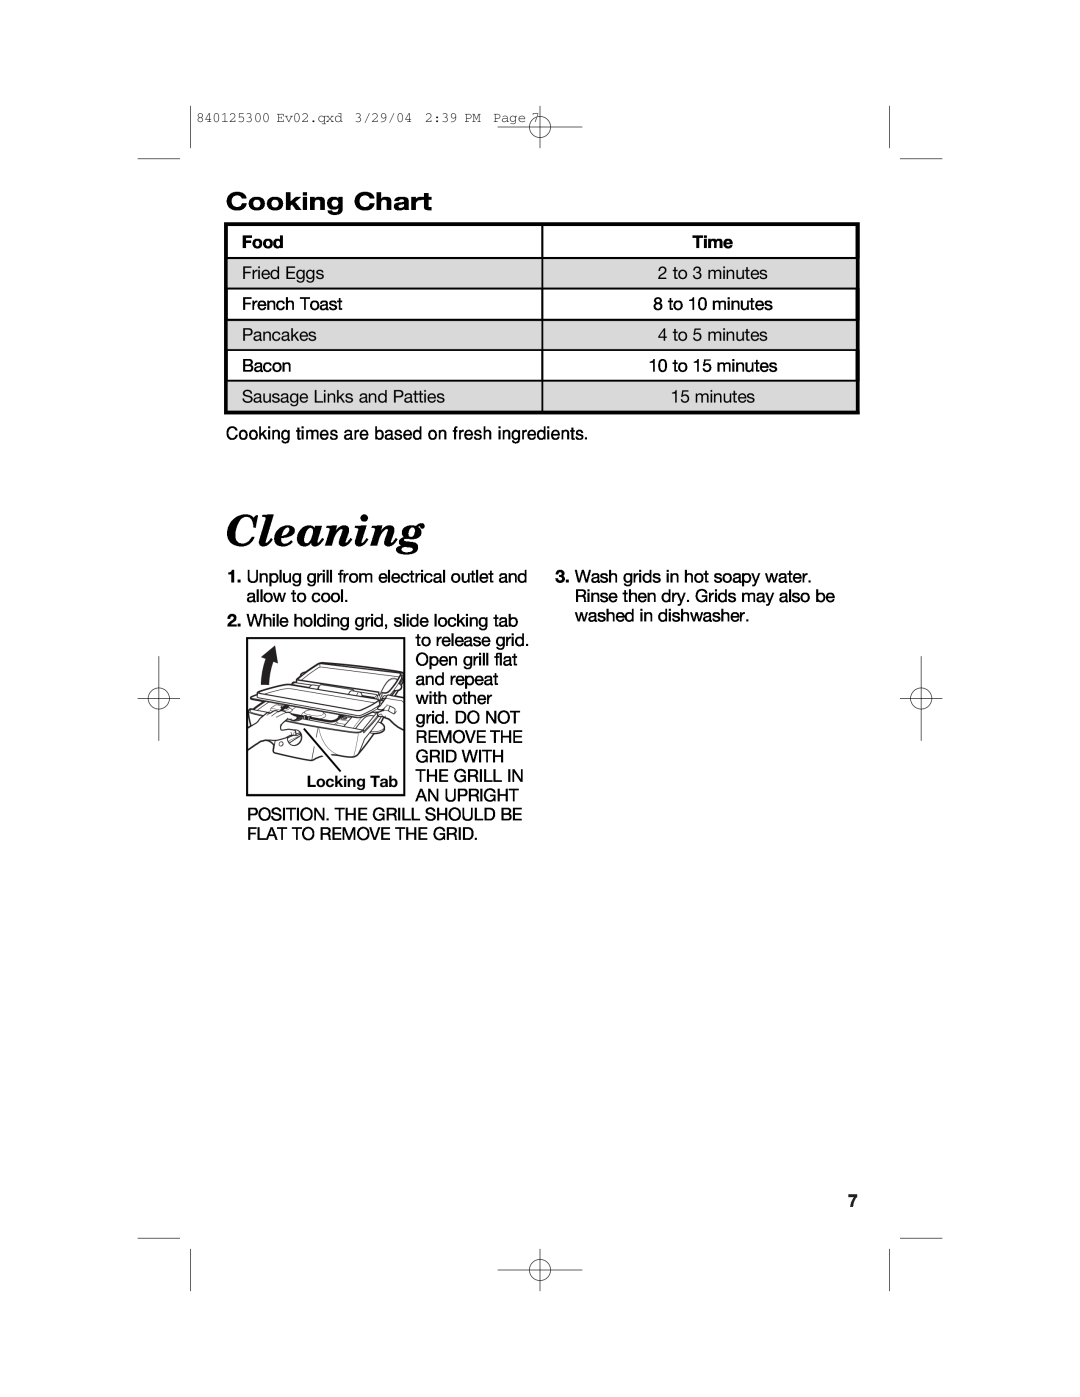 Hamilton Beach 25295 manual Cleaning, Cooking Chart, Food, Time 